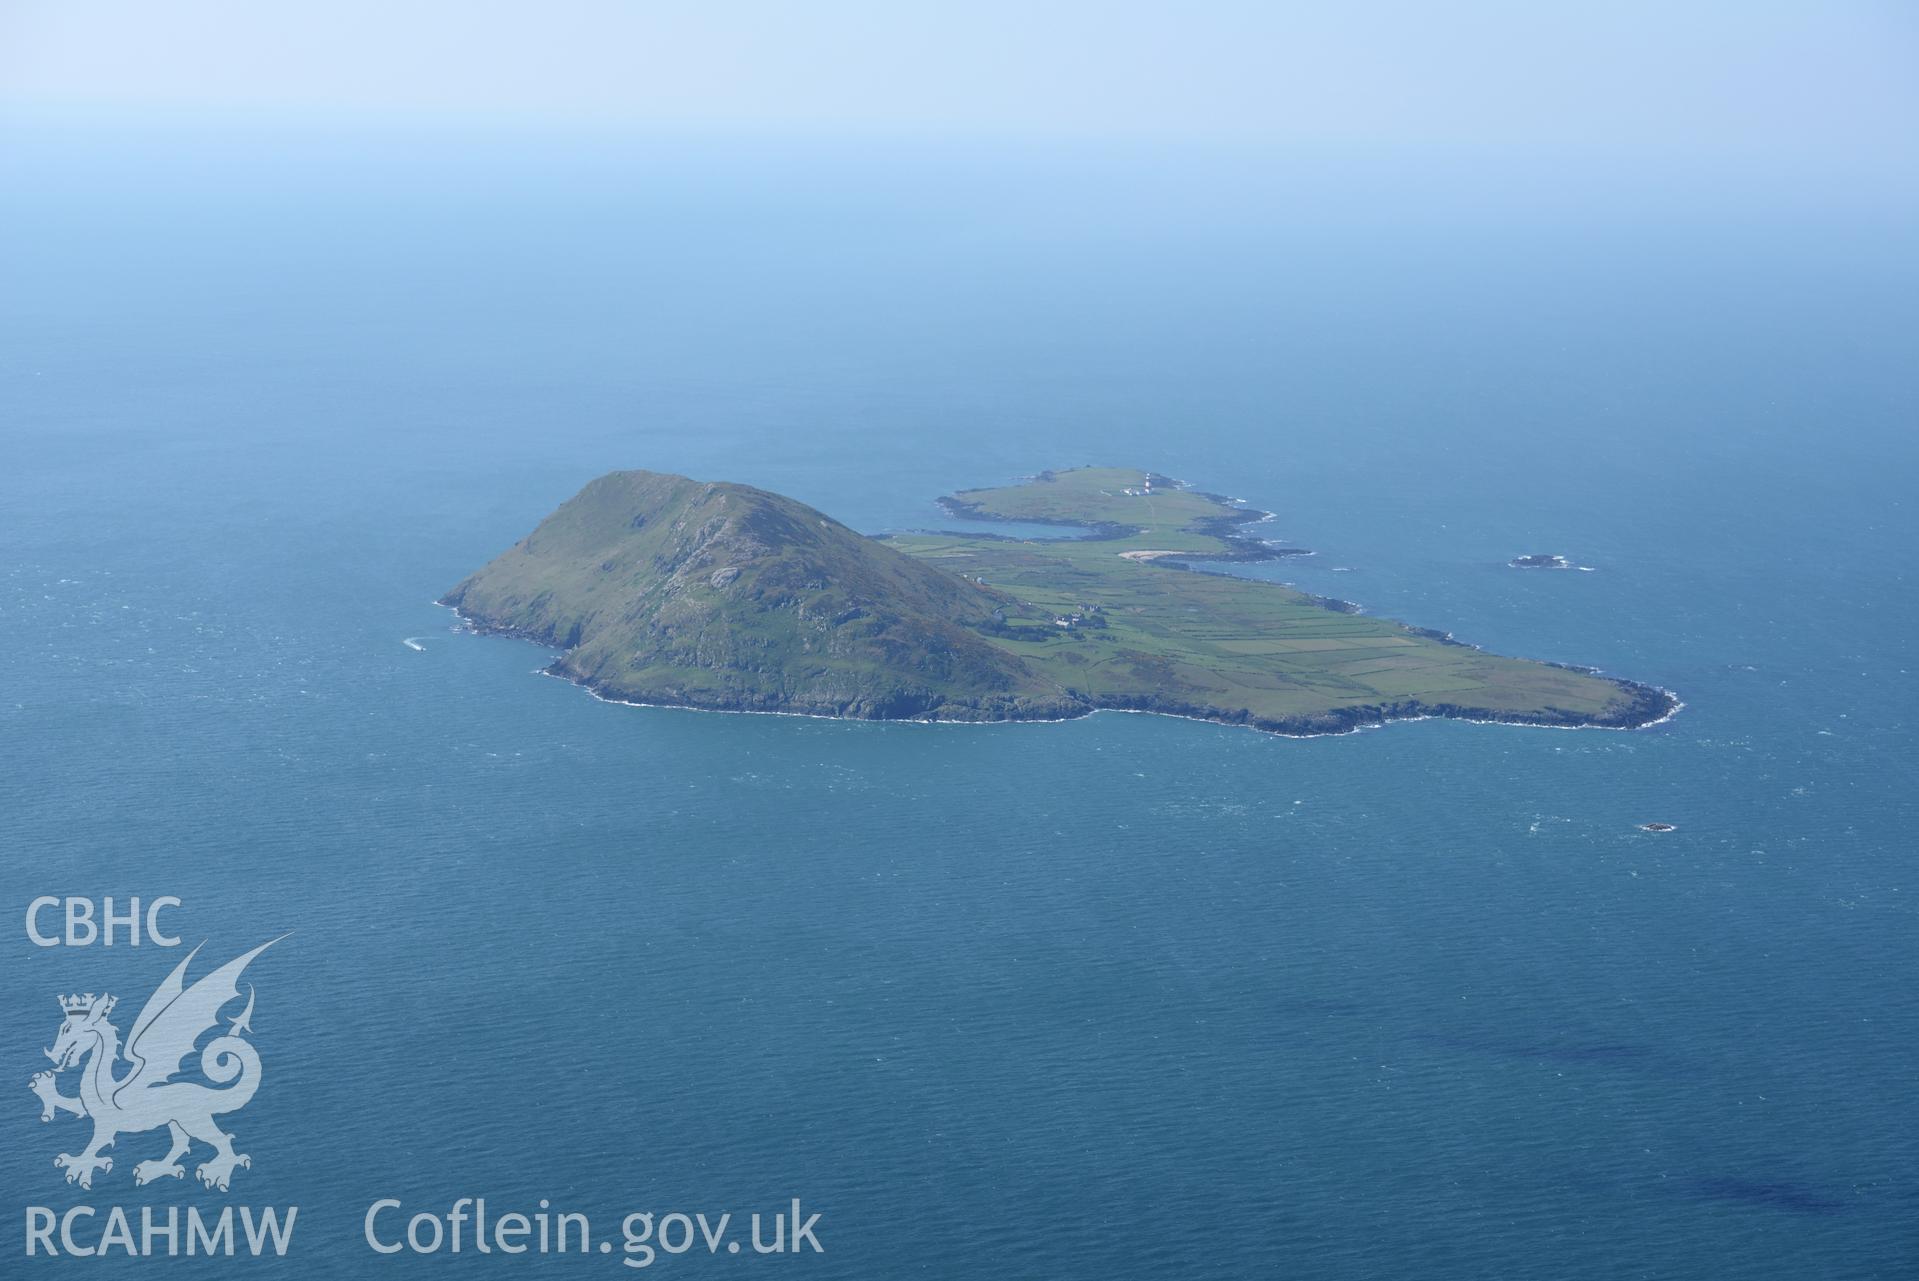 Aerial photography of Bardsey Island or Ynys Enlli taken on 3rd May 2017.  Baseline aerial reconnaissance survey for the CHERISH Project. ? Crown: CHERISH PROJECT 2017. Produced with EU funds through the Ireland Wales Co-operation Programme 2014-2020. All material made freely available through the Open Government Licence.